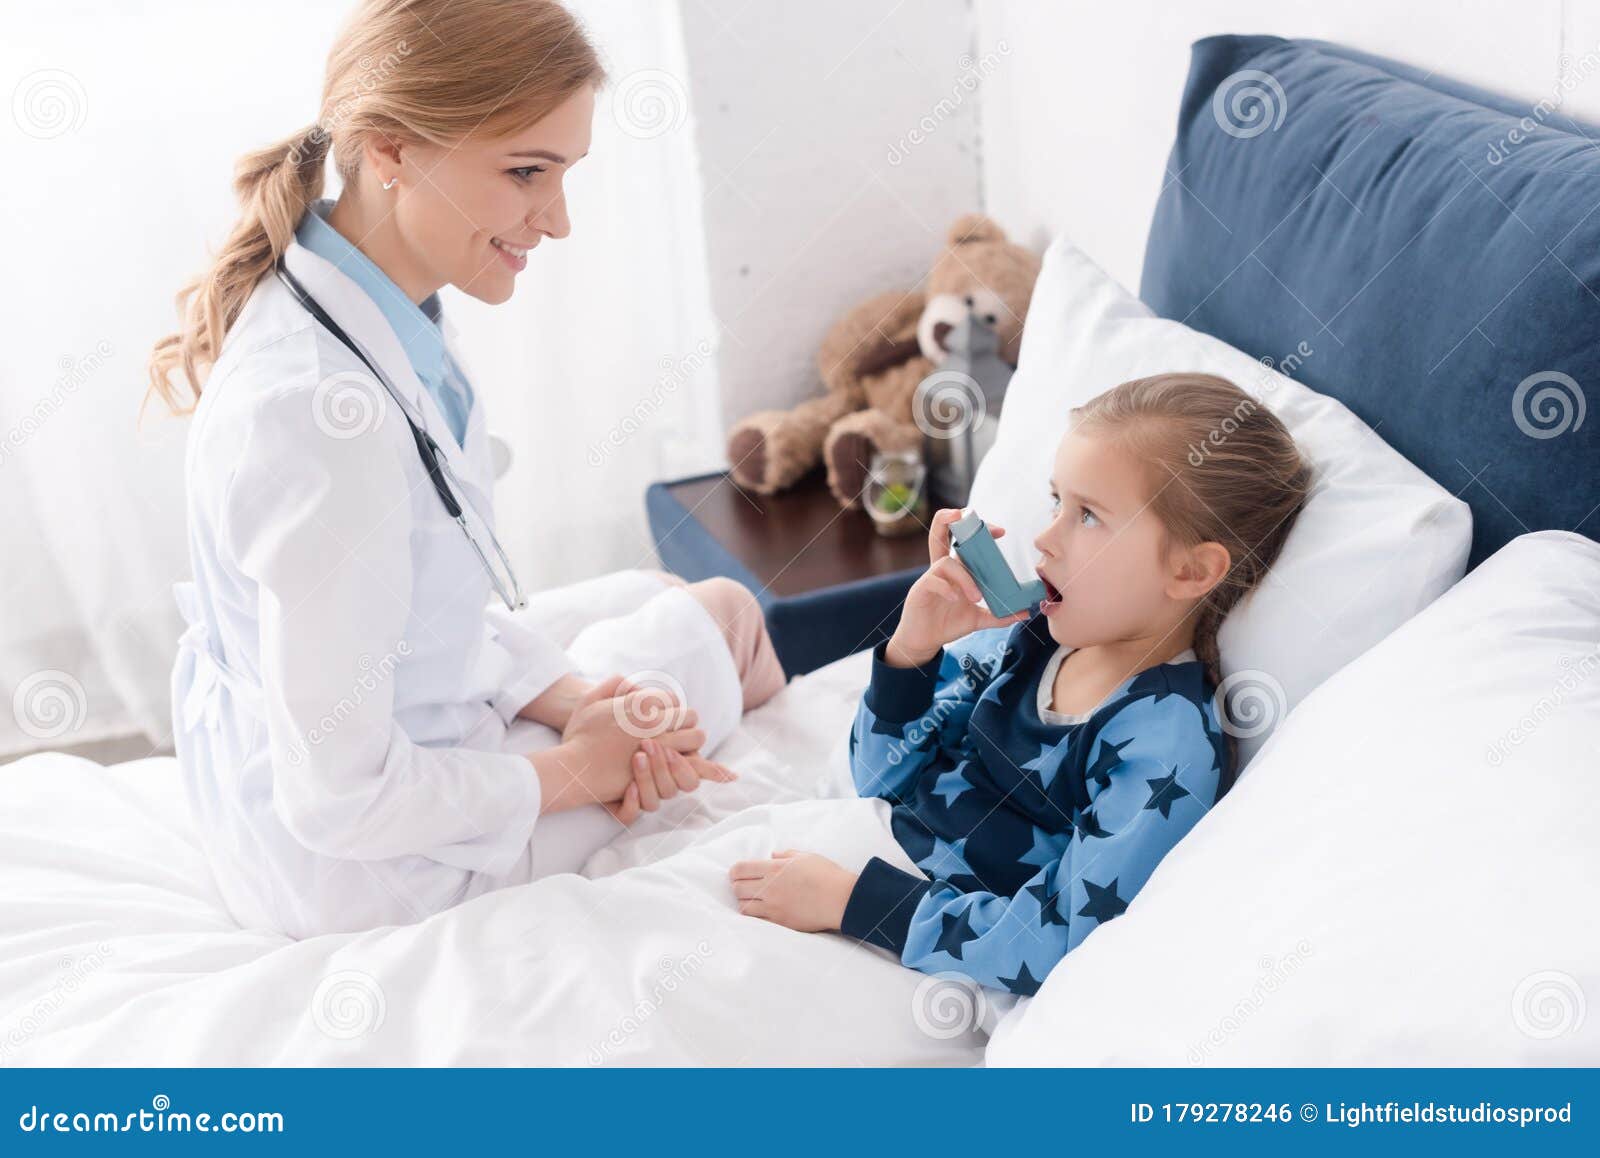 doctor looking at asthmatic child with